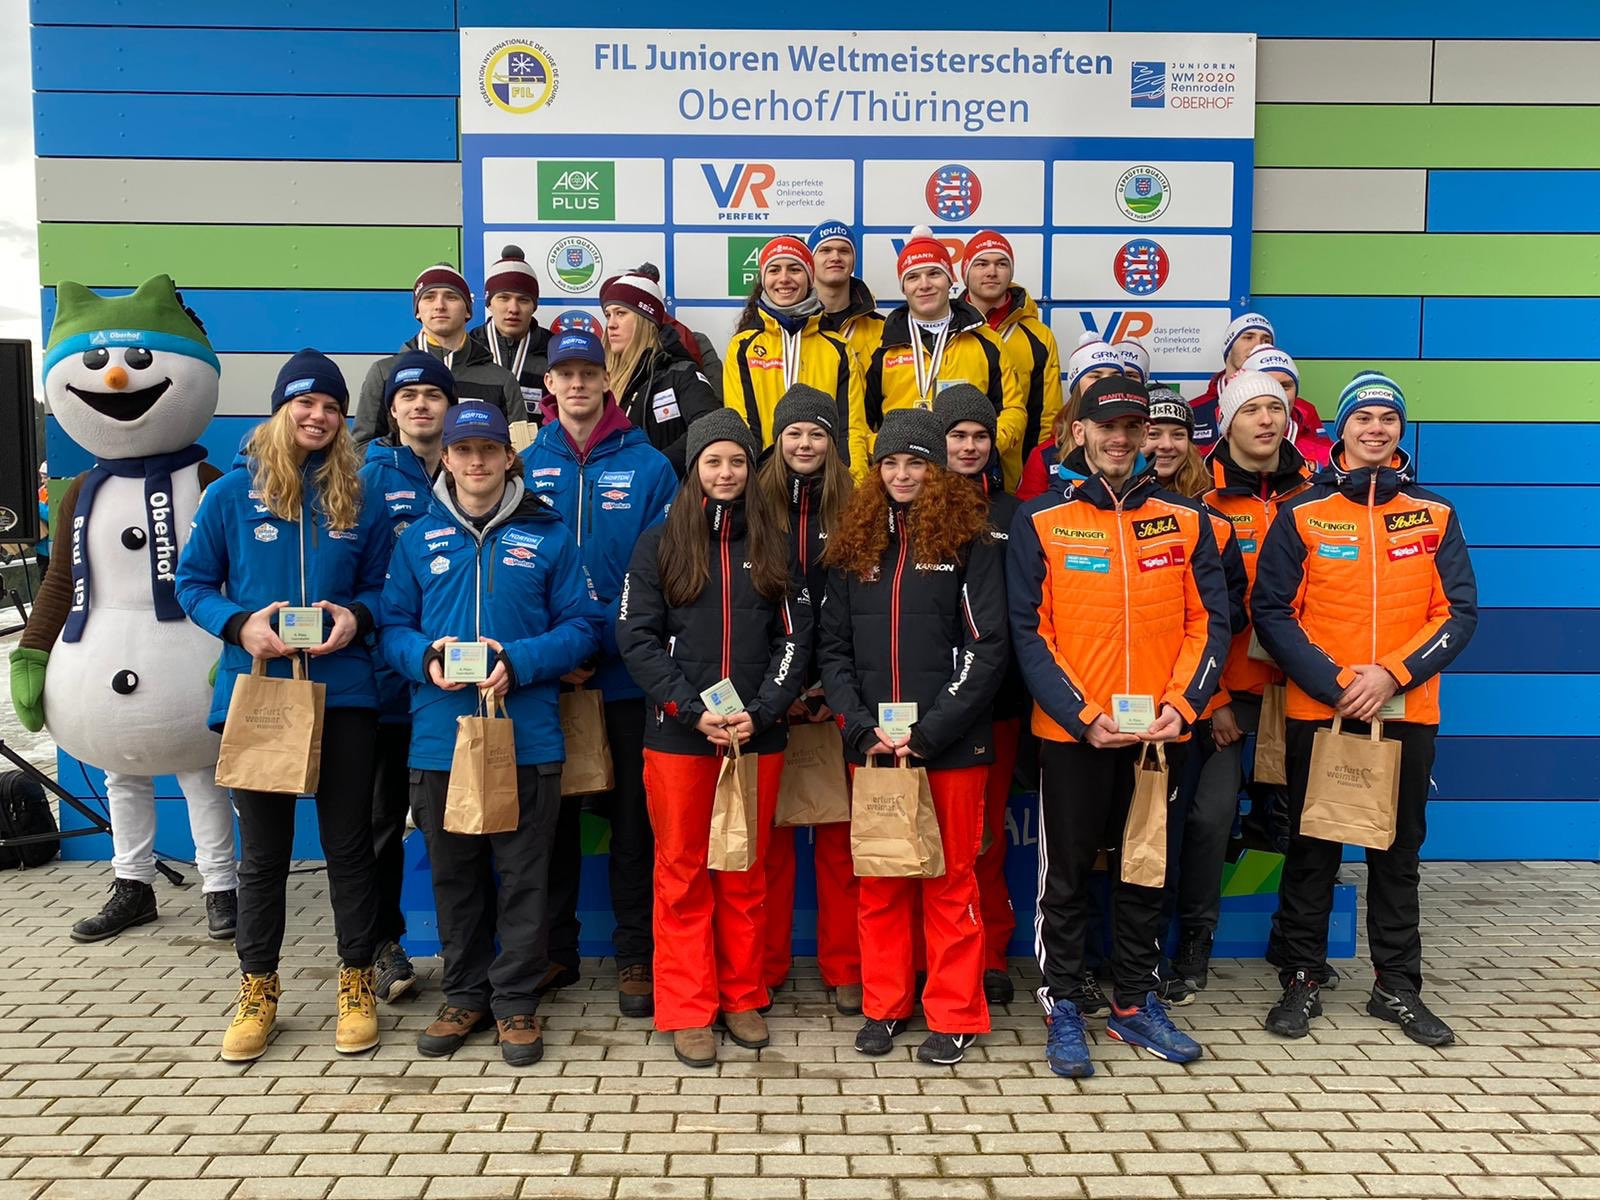 Germany topped the podium after winning the team competition to wrap up the FIL Junior World Championships ©Twitter/FIL_Luge